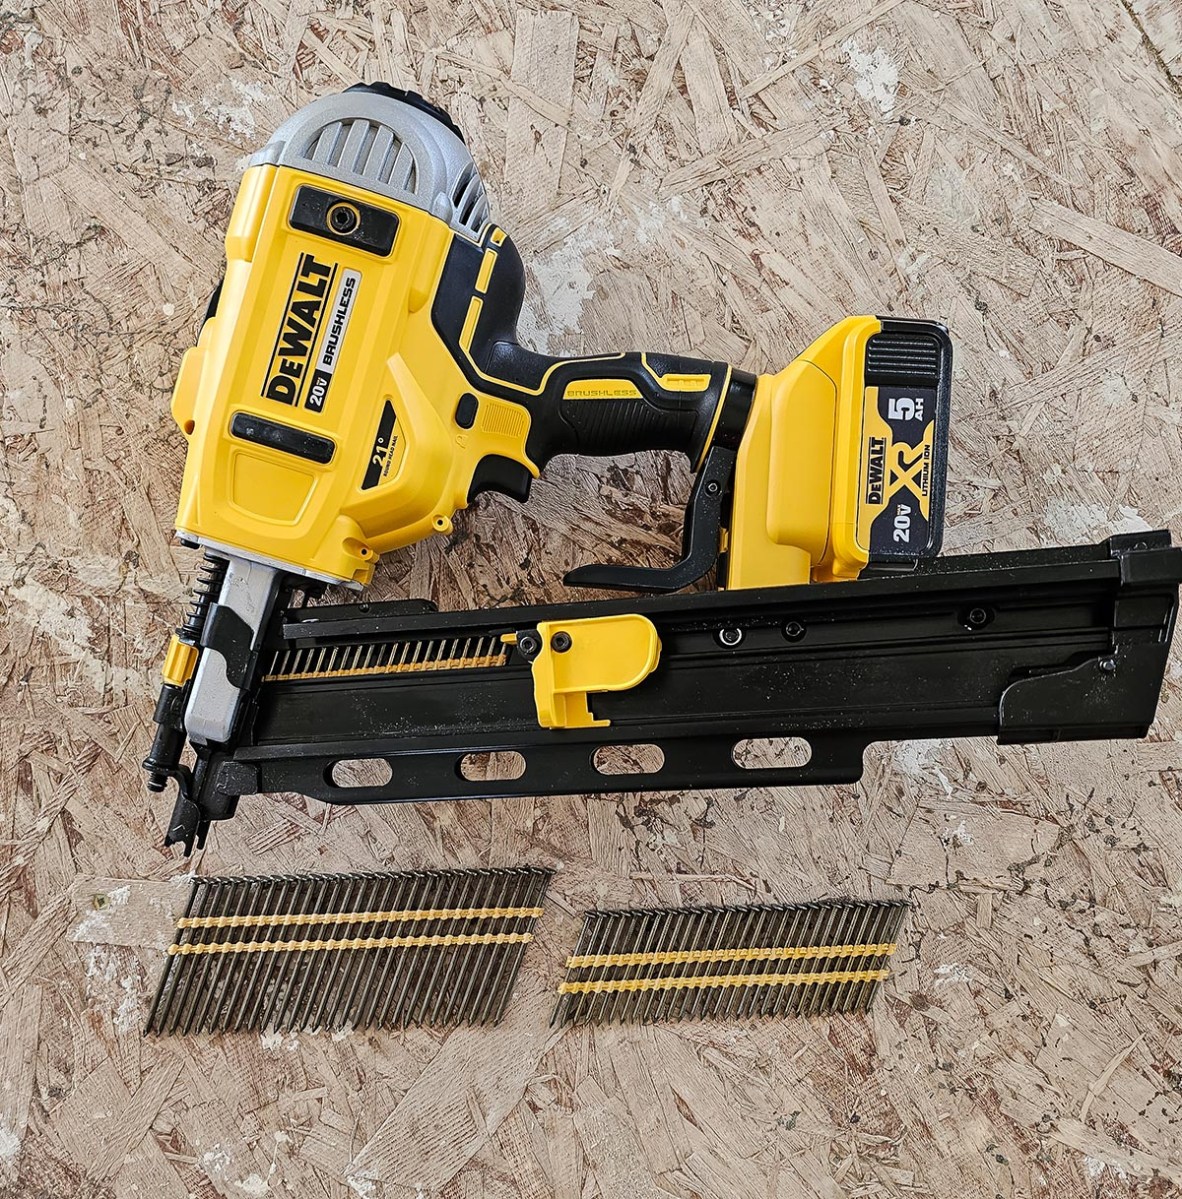 DeWalt Cordless Framing Nailer resting on its side on plywood next to a full cartridge of nails.